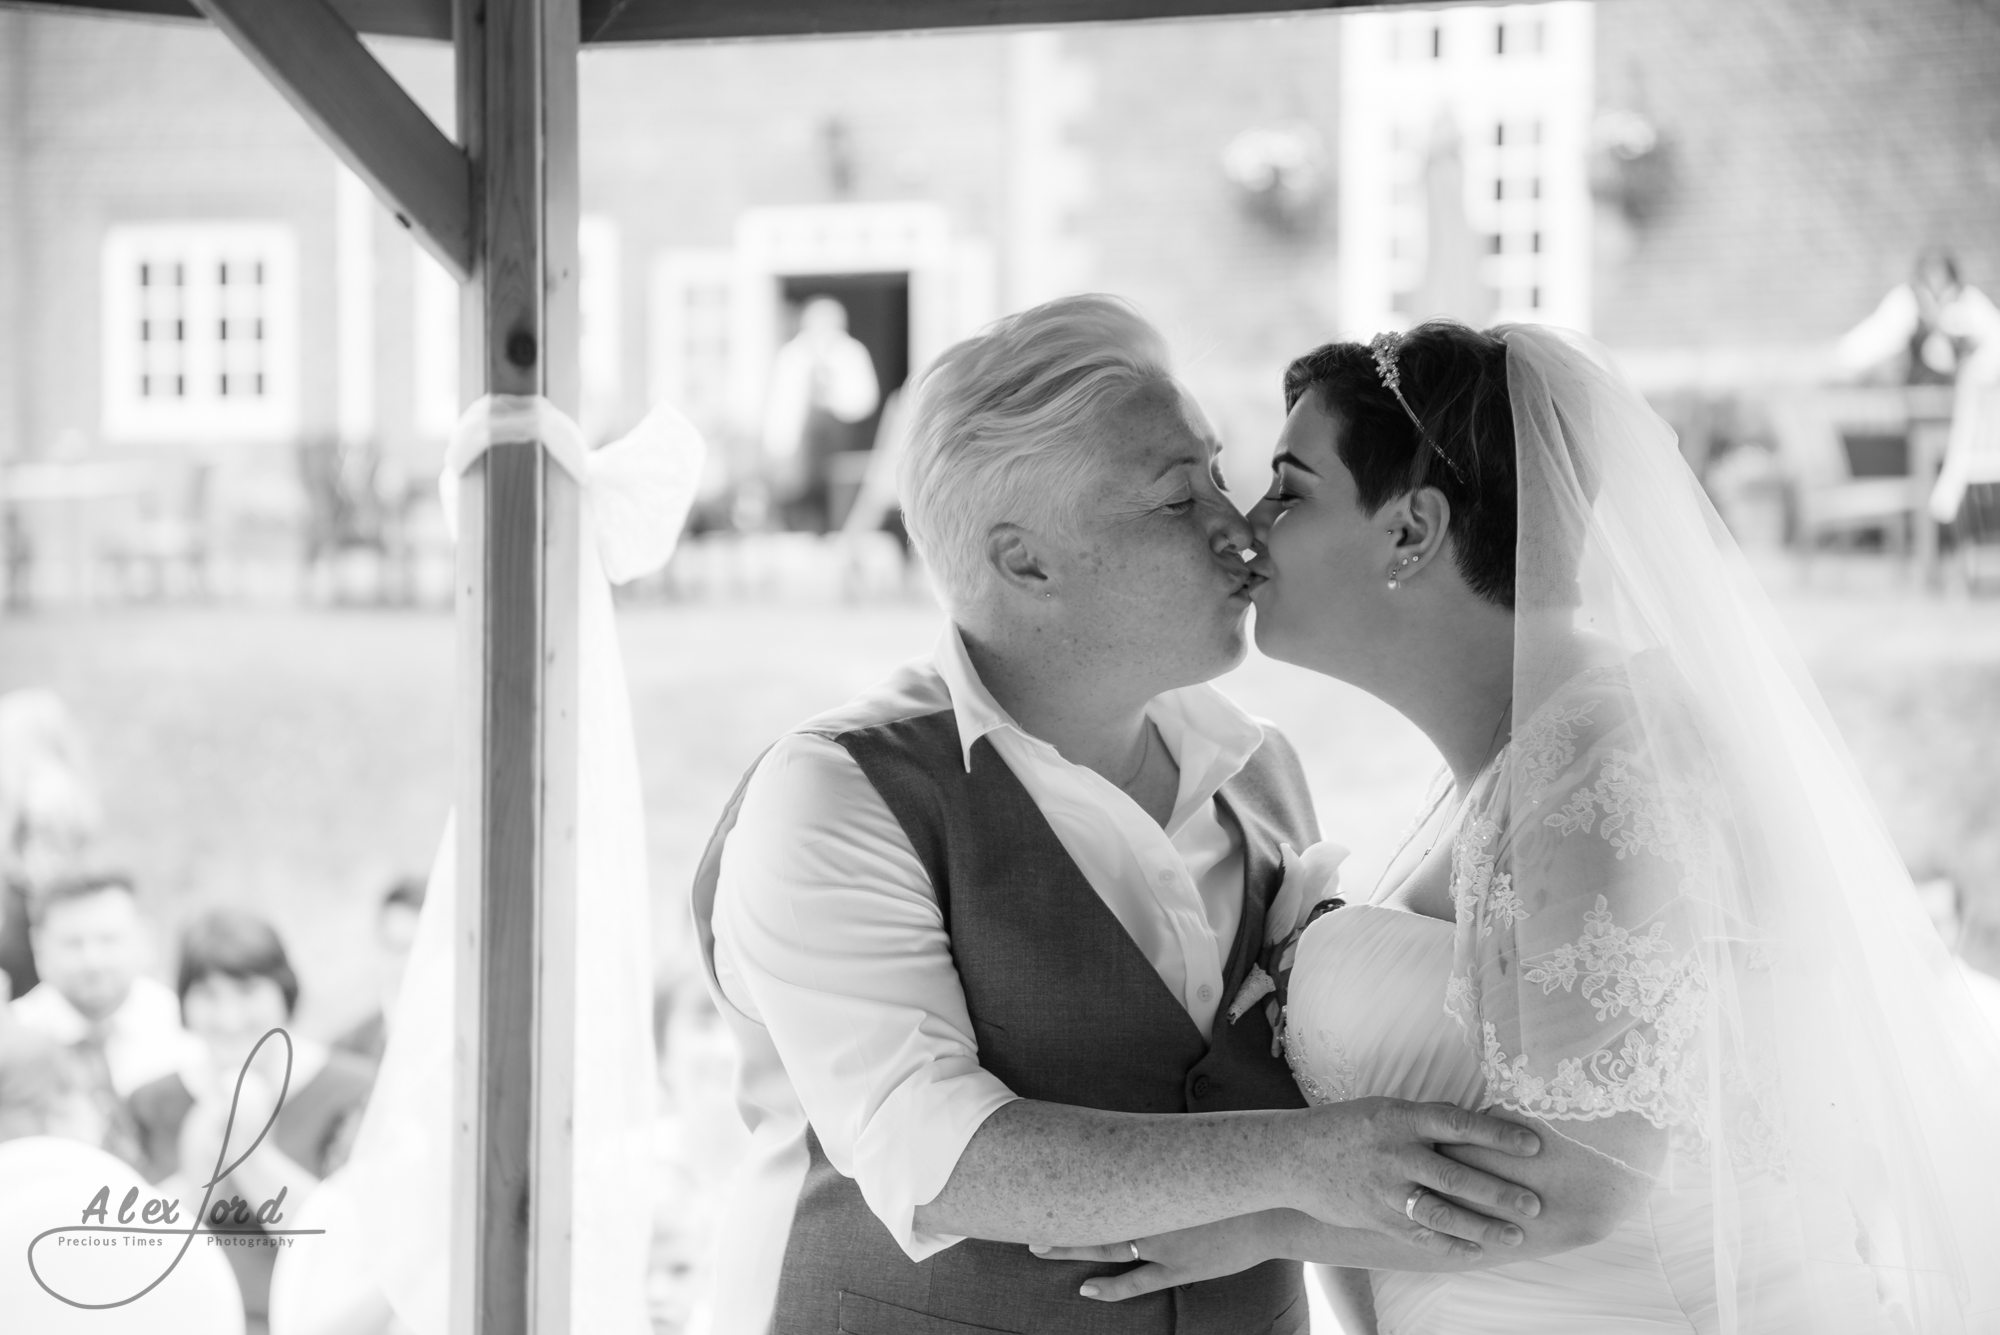 the bride and bride share their first kiss as a married couple